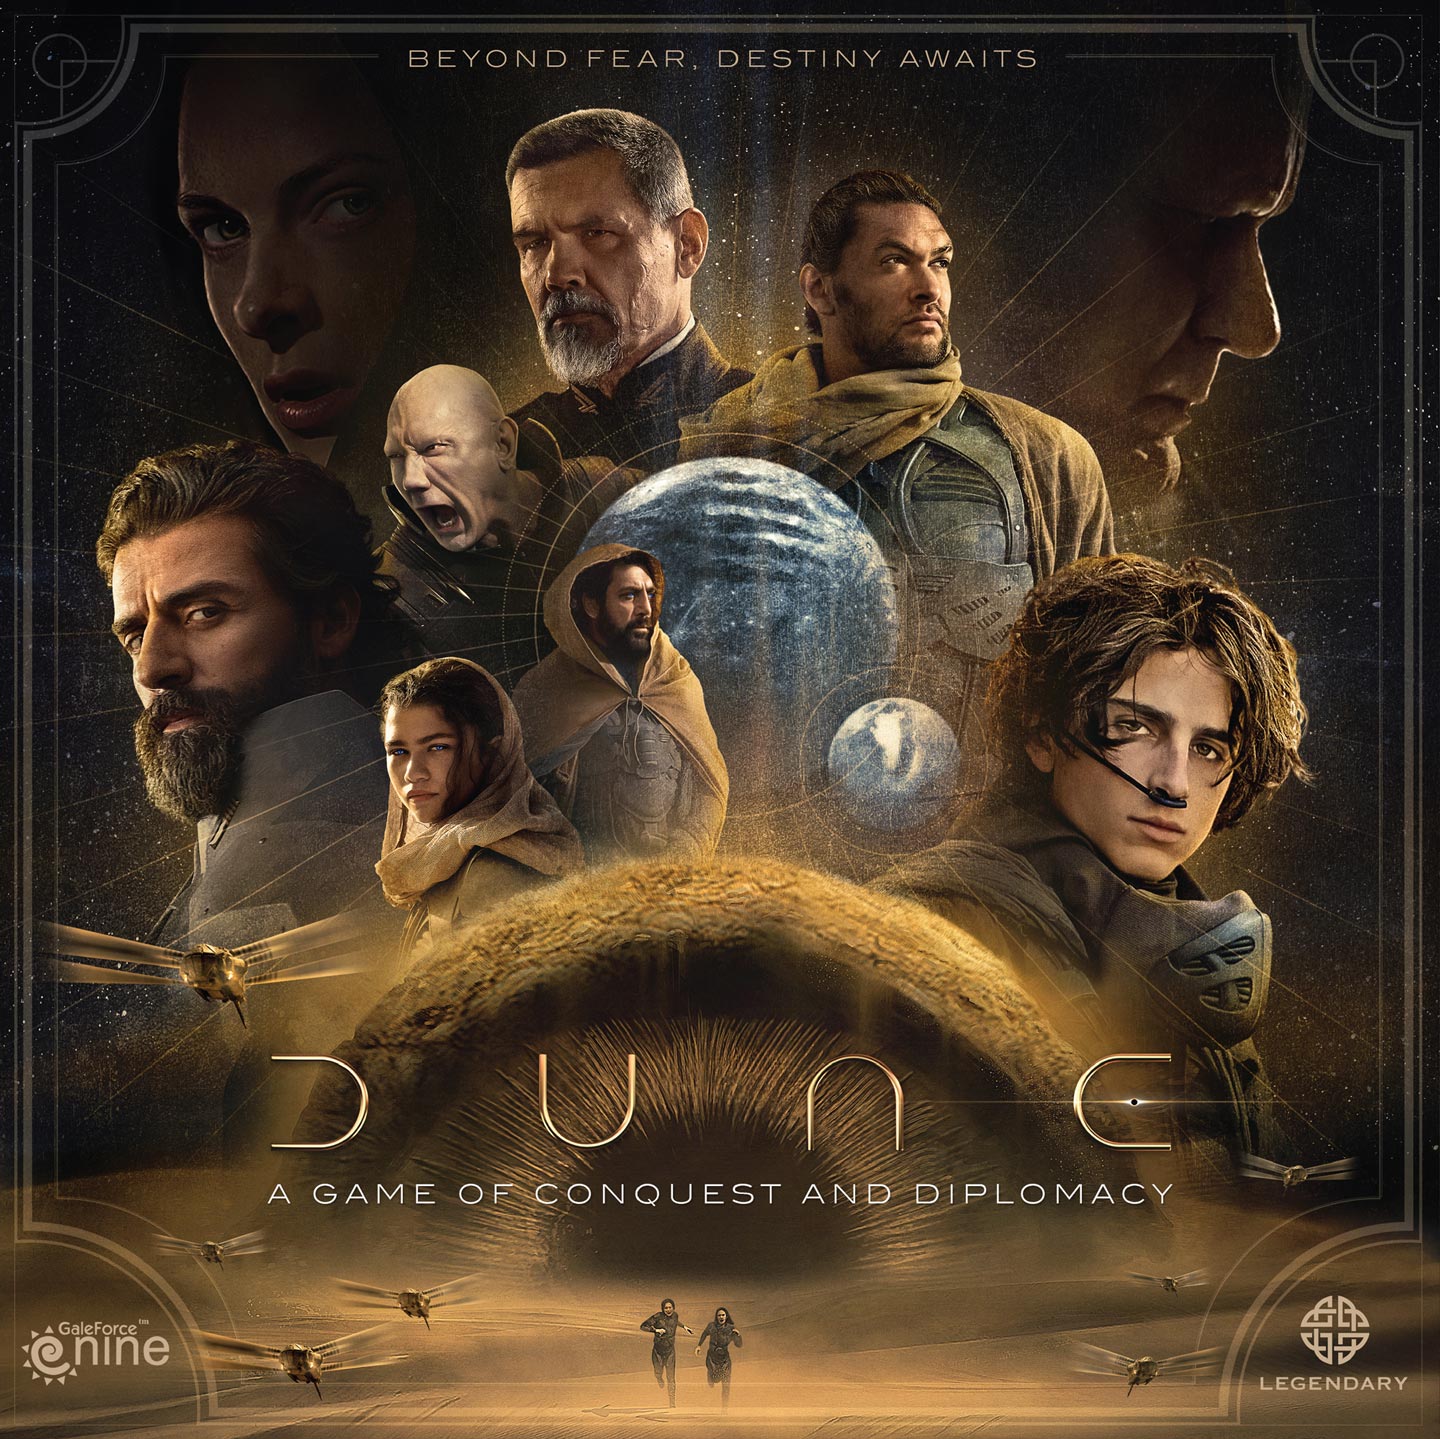 The box artwork 'Dune: A Game of Conquest and Diplomacy', from Gale Force Nine, featuring the actors and visuals of 2021's Dune movie.